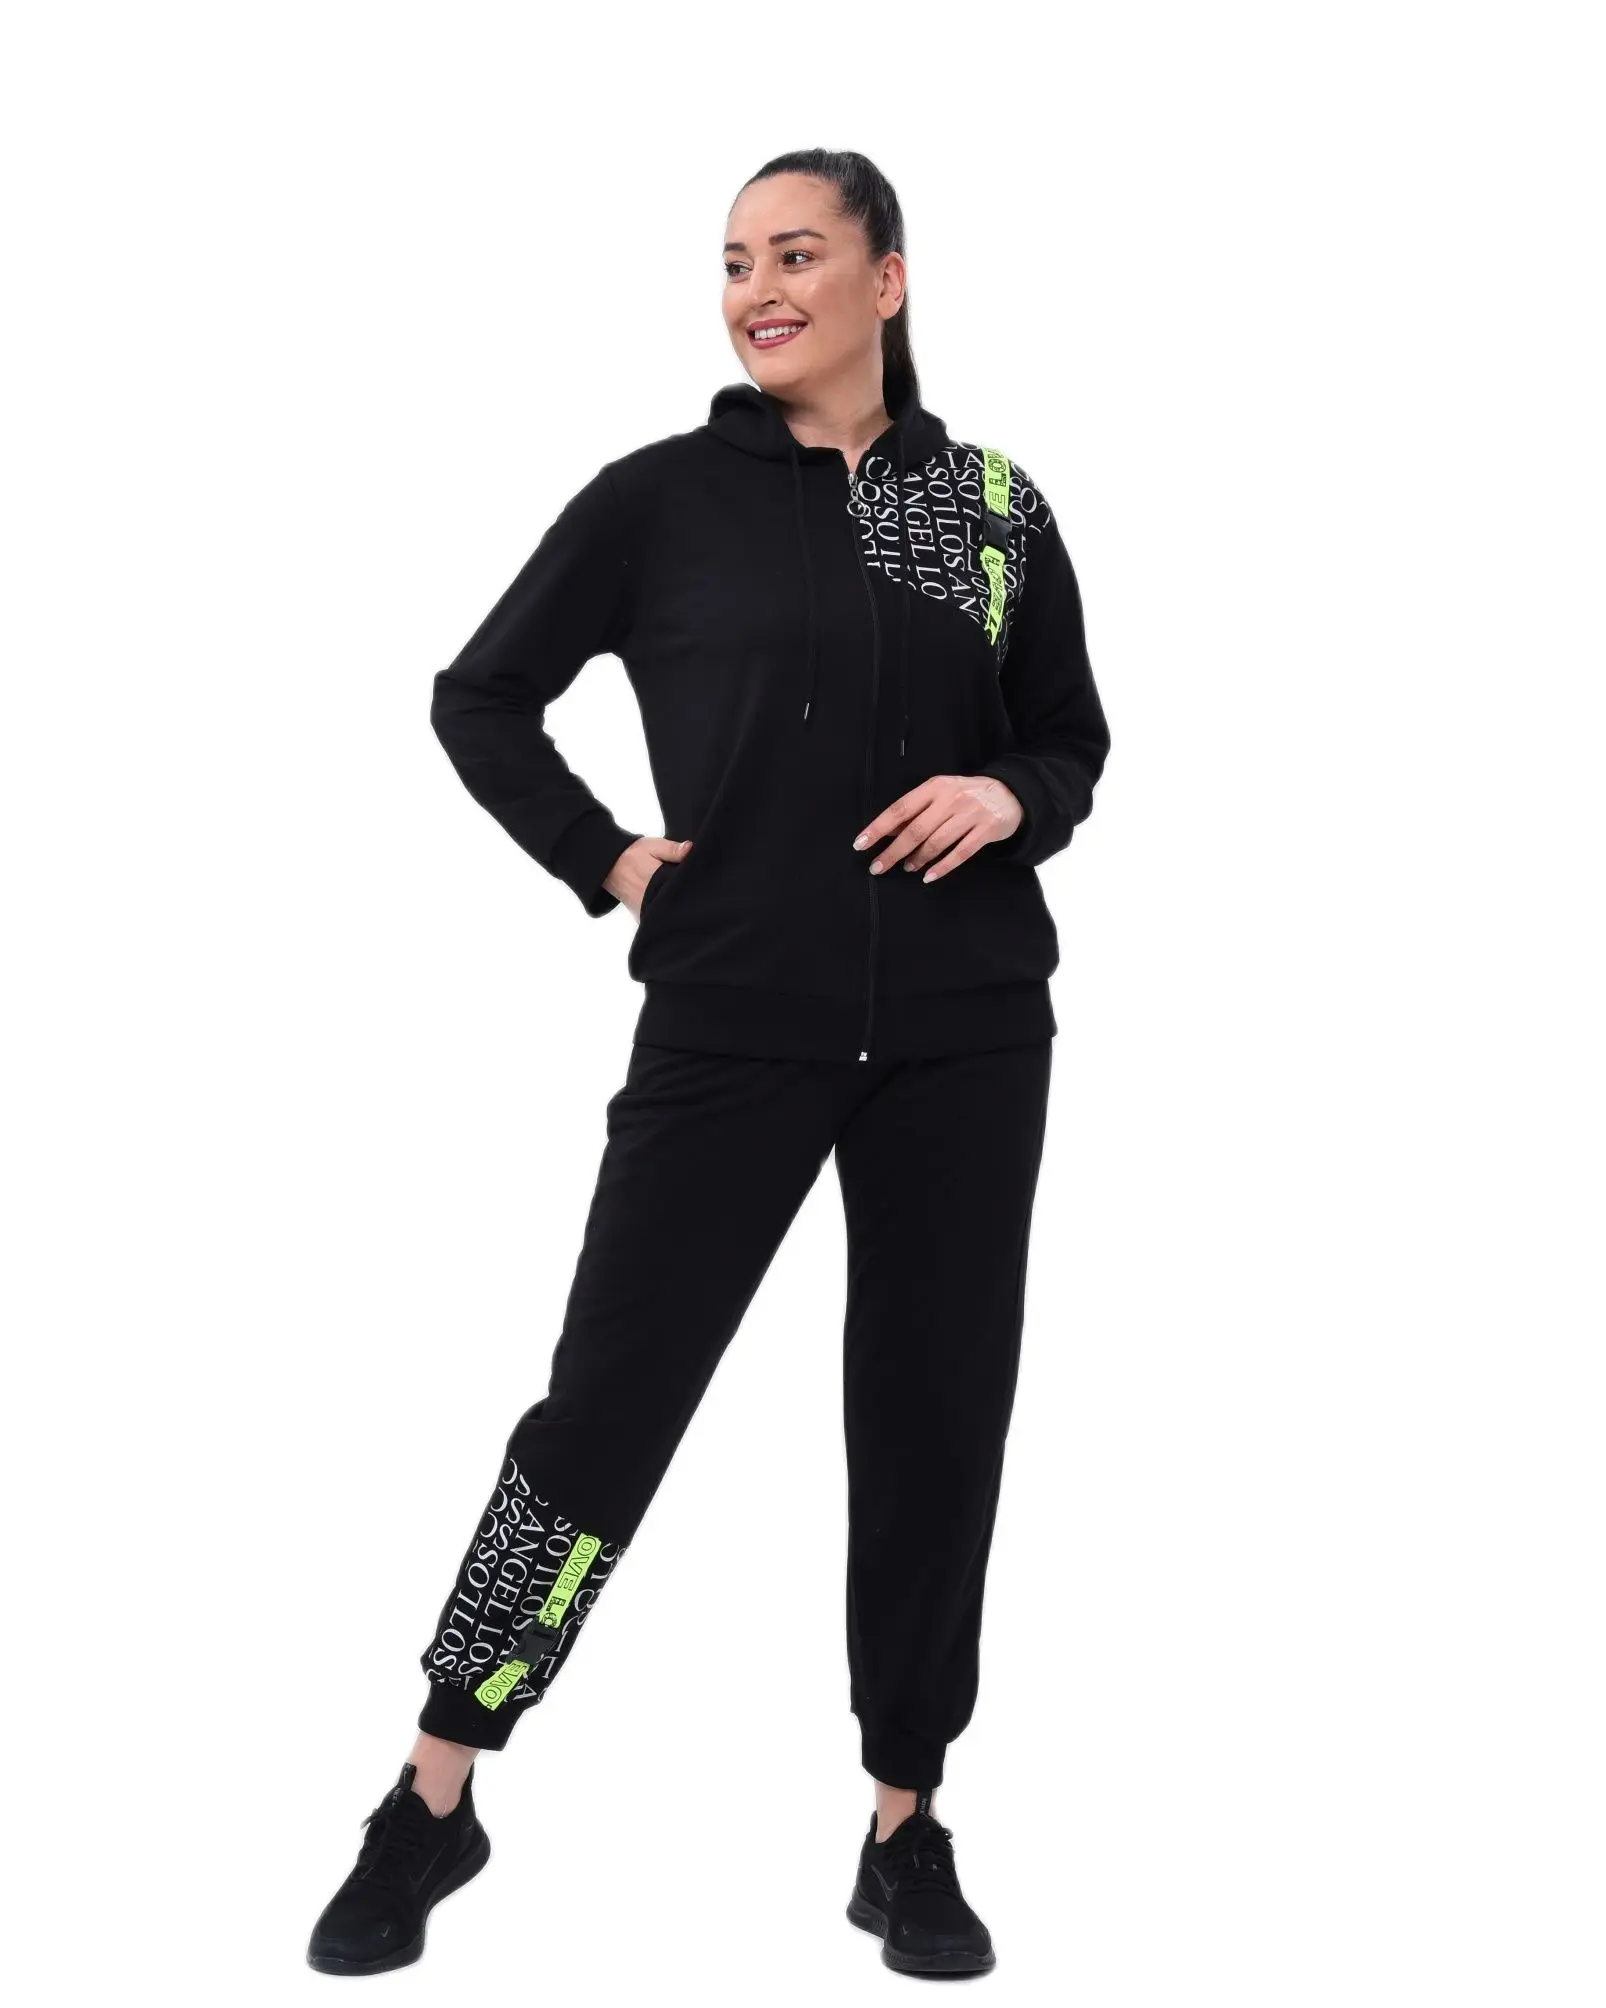 Women’s Plus Size Black Sweatsuit Set 2 Piece Neon Stripe And Letter Detail Tracksuit, Designed and Made in Turkey, New Arrival